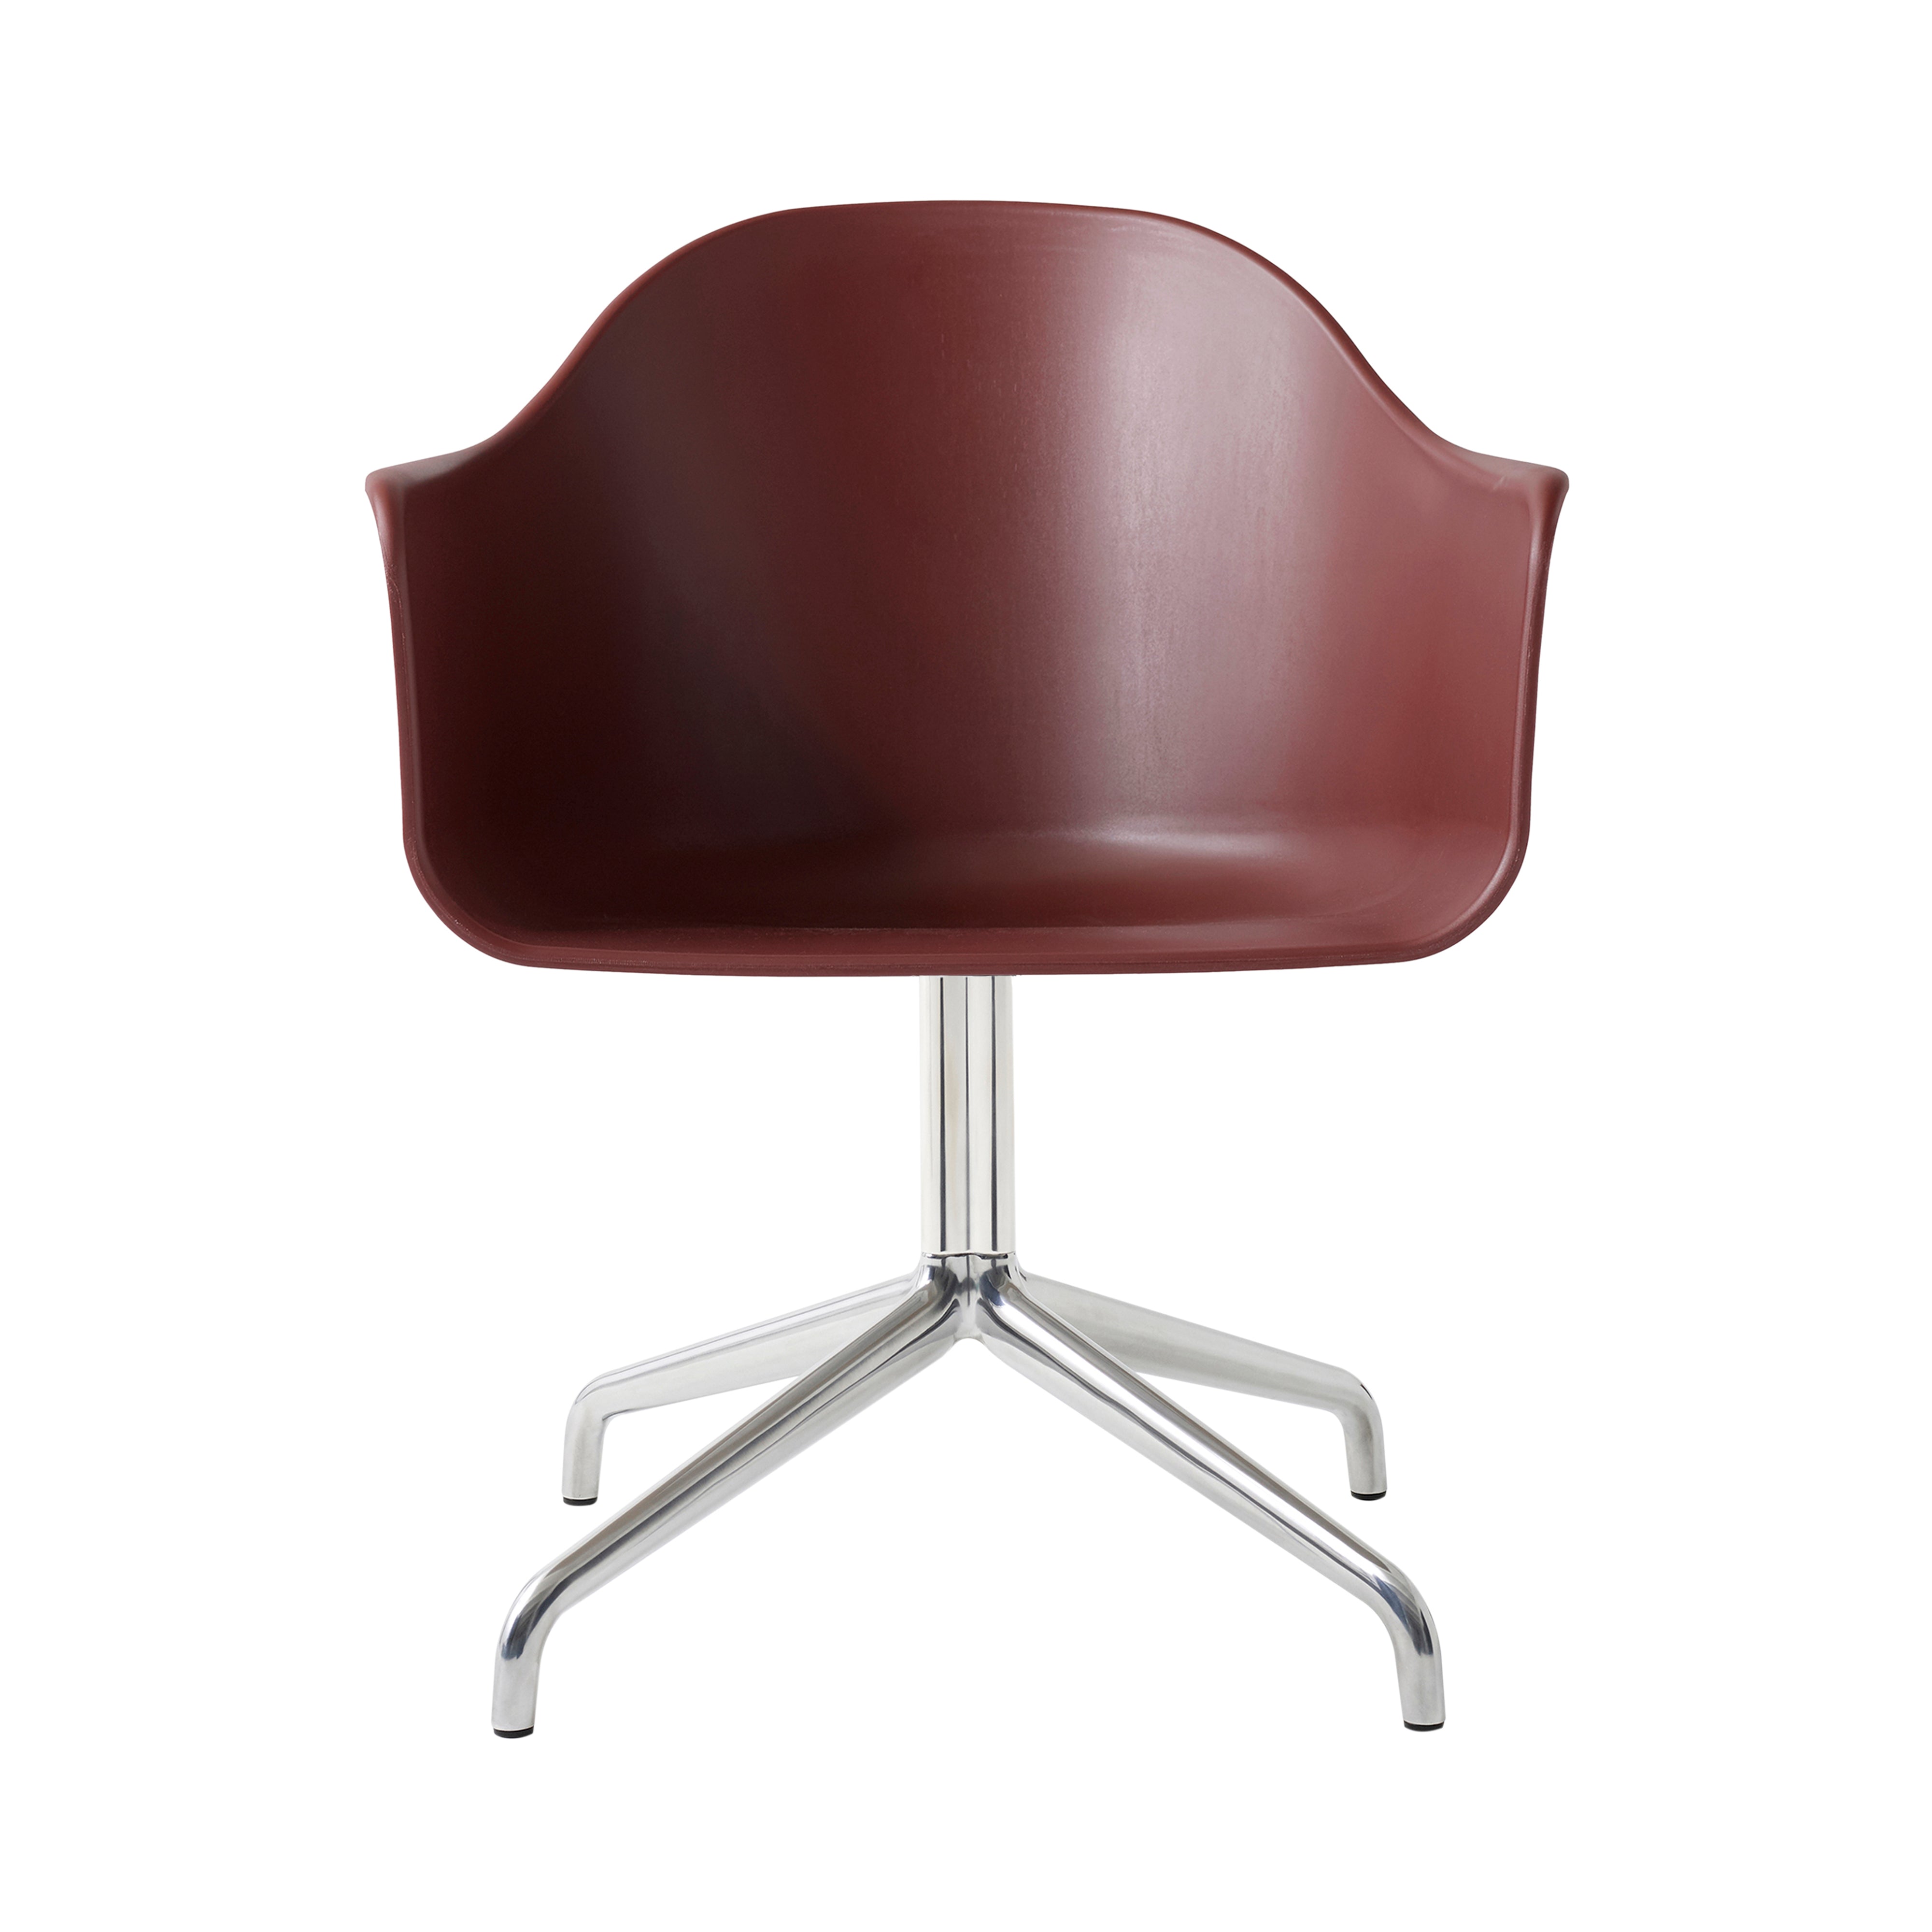 Harbour Dining Chair: Star Base + Polished Aluminum + Burned Red